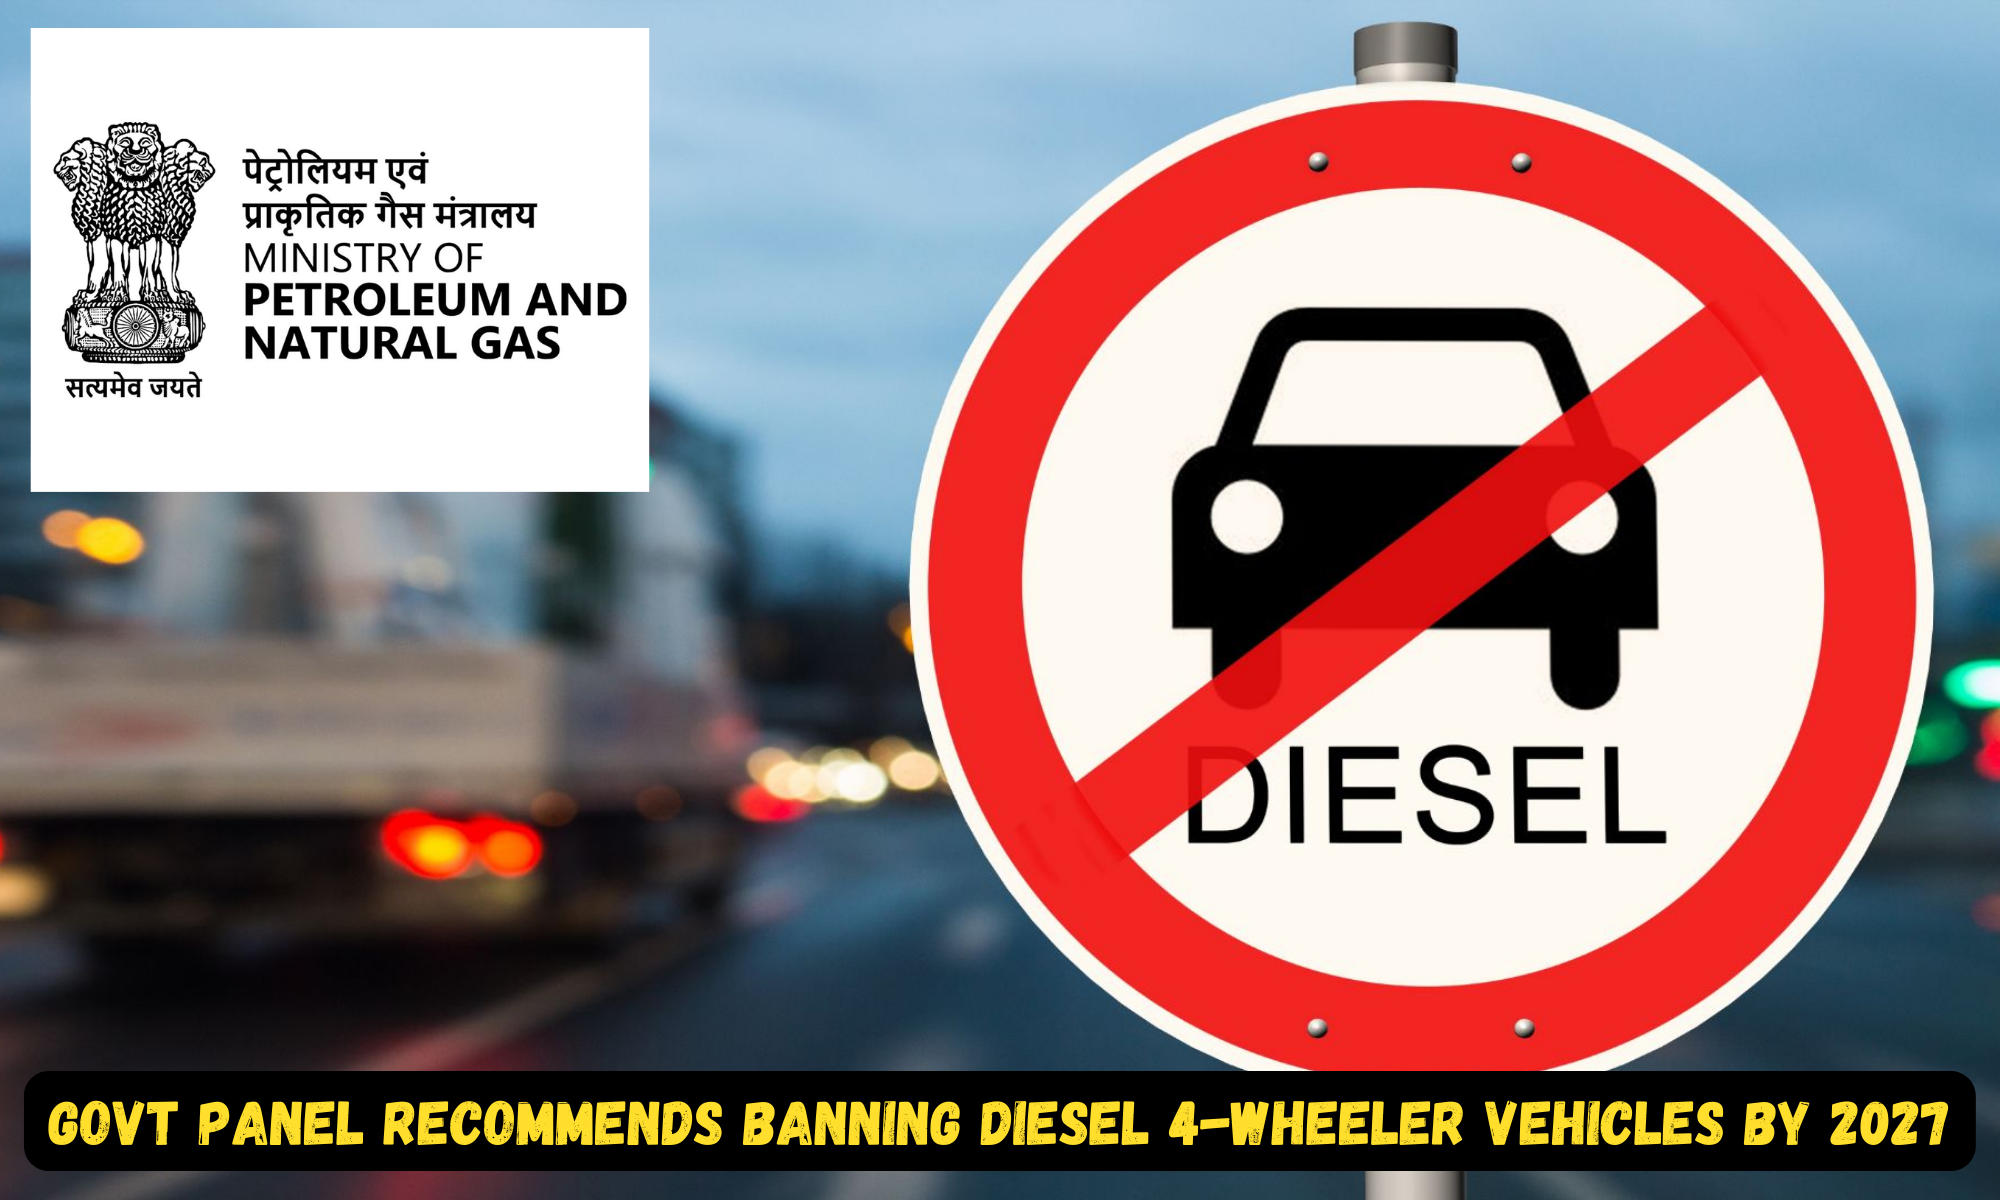 Govt Panel Recommends Banning Diesel 4-Wheeler Vehicles by 2027